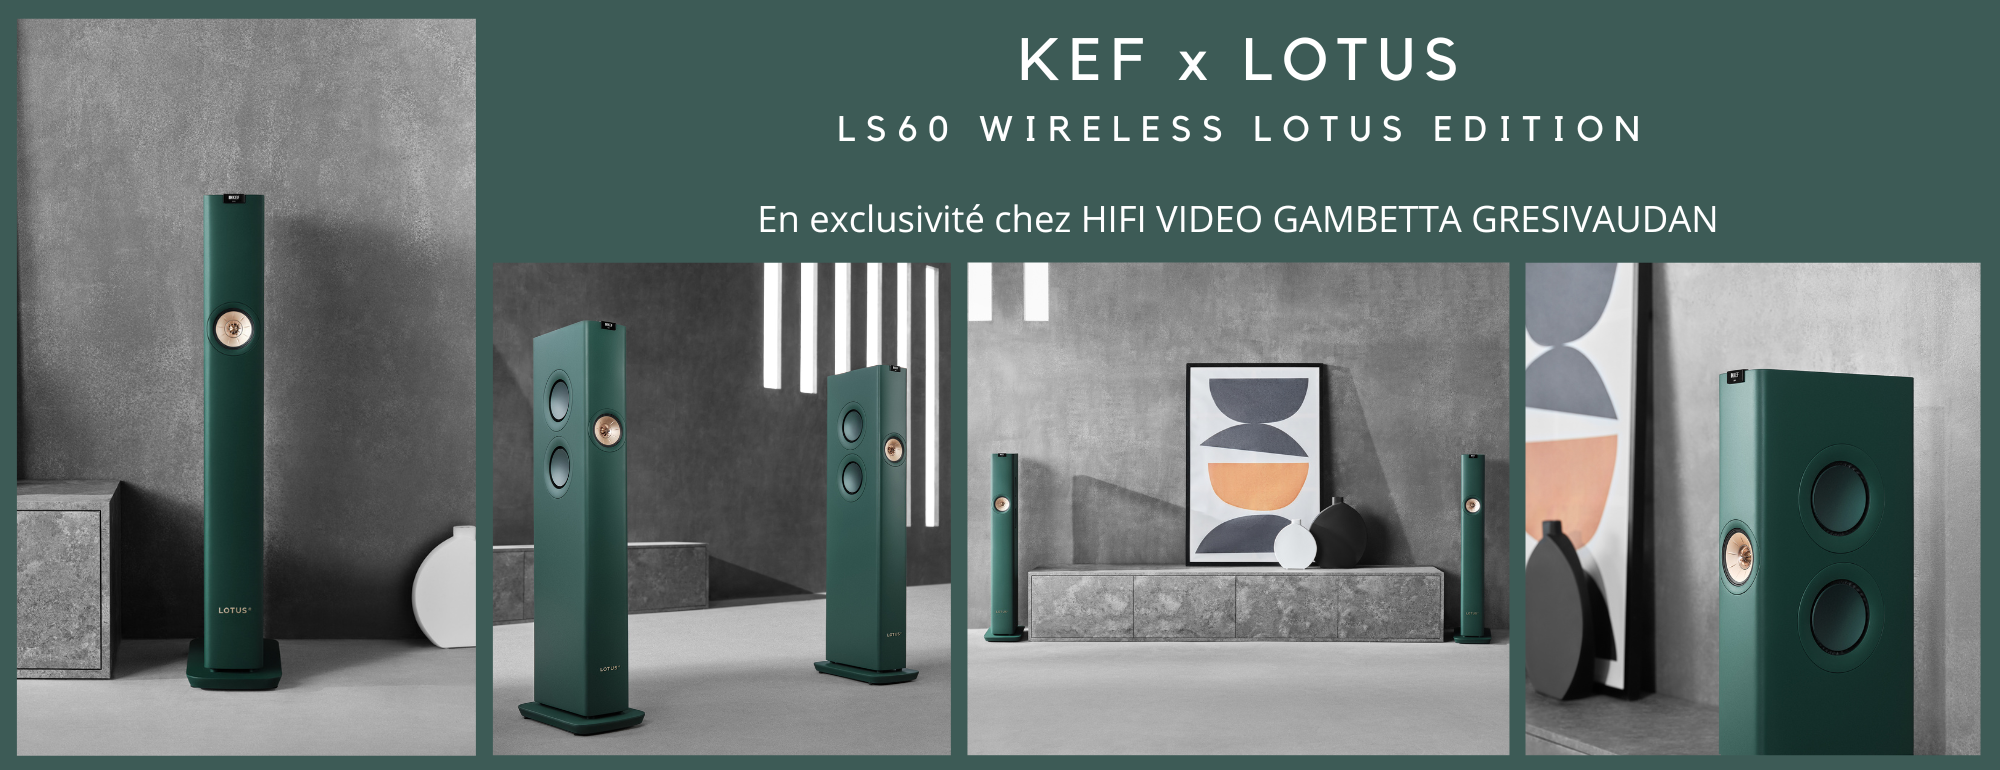 kef x lotus your story